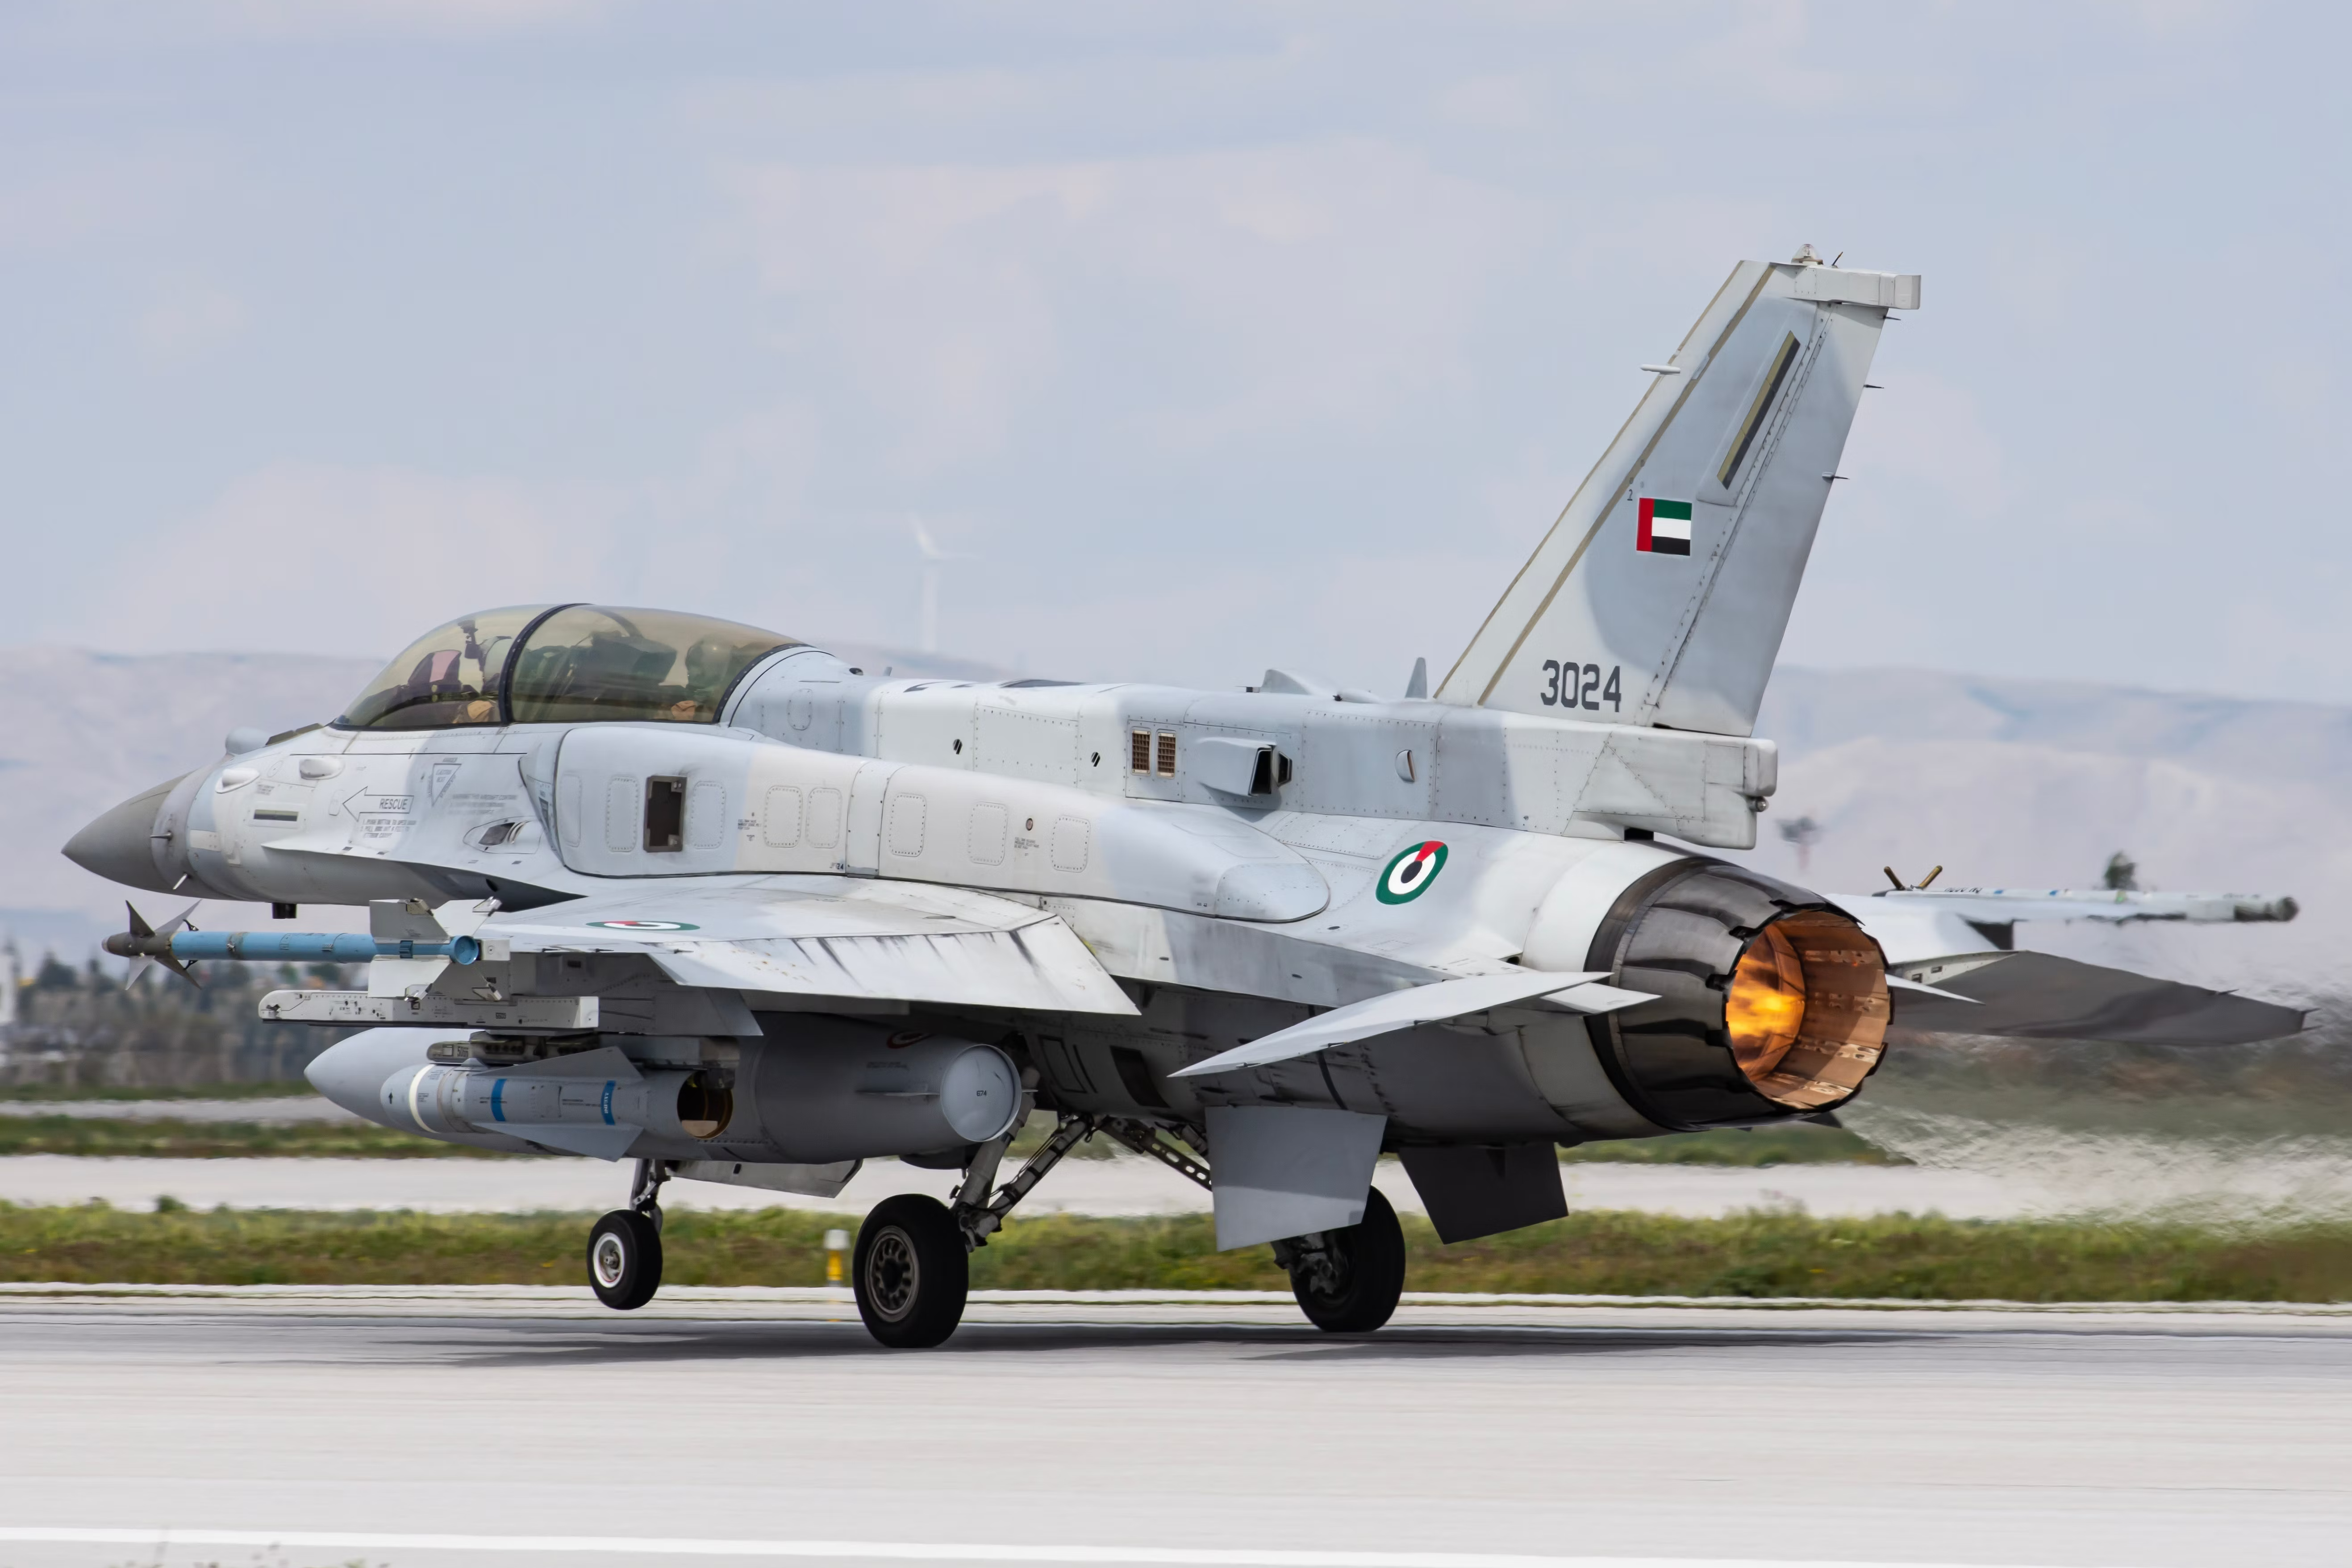 An F-16 of the UAE Air Force abuot to take off.